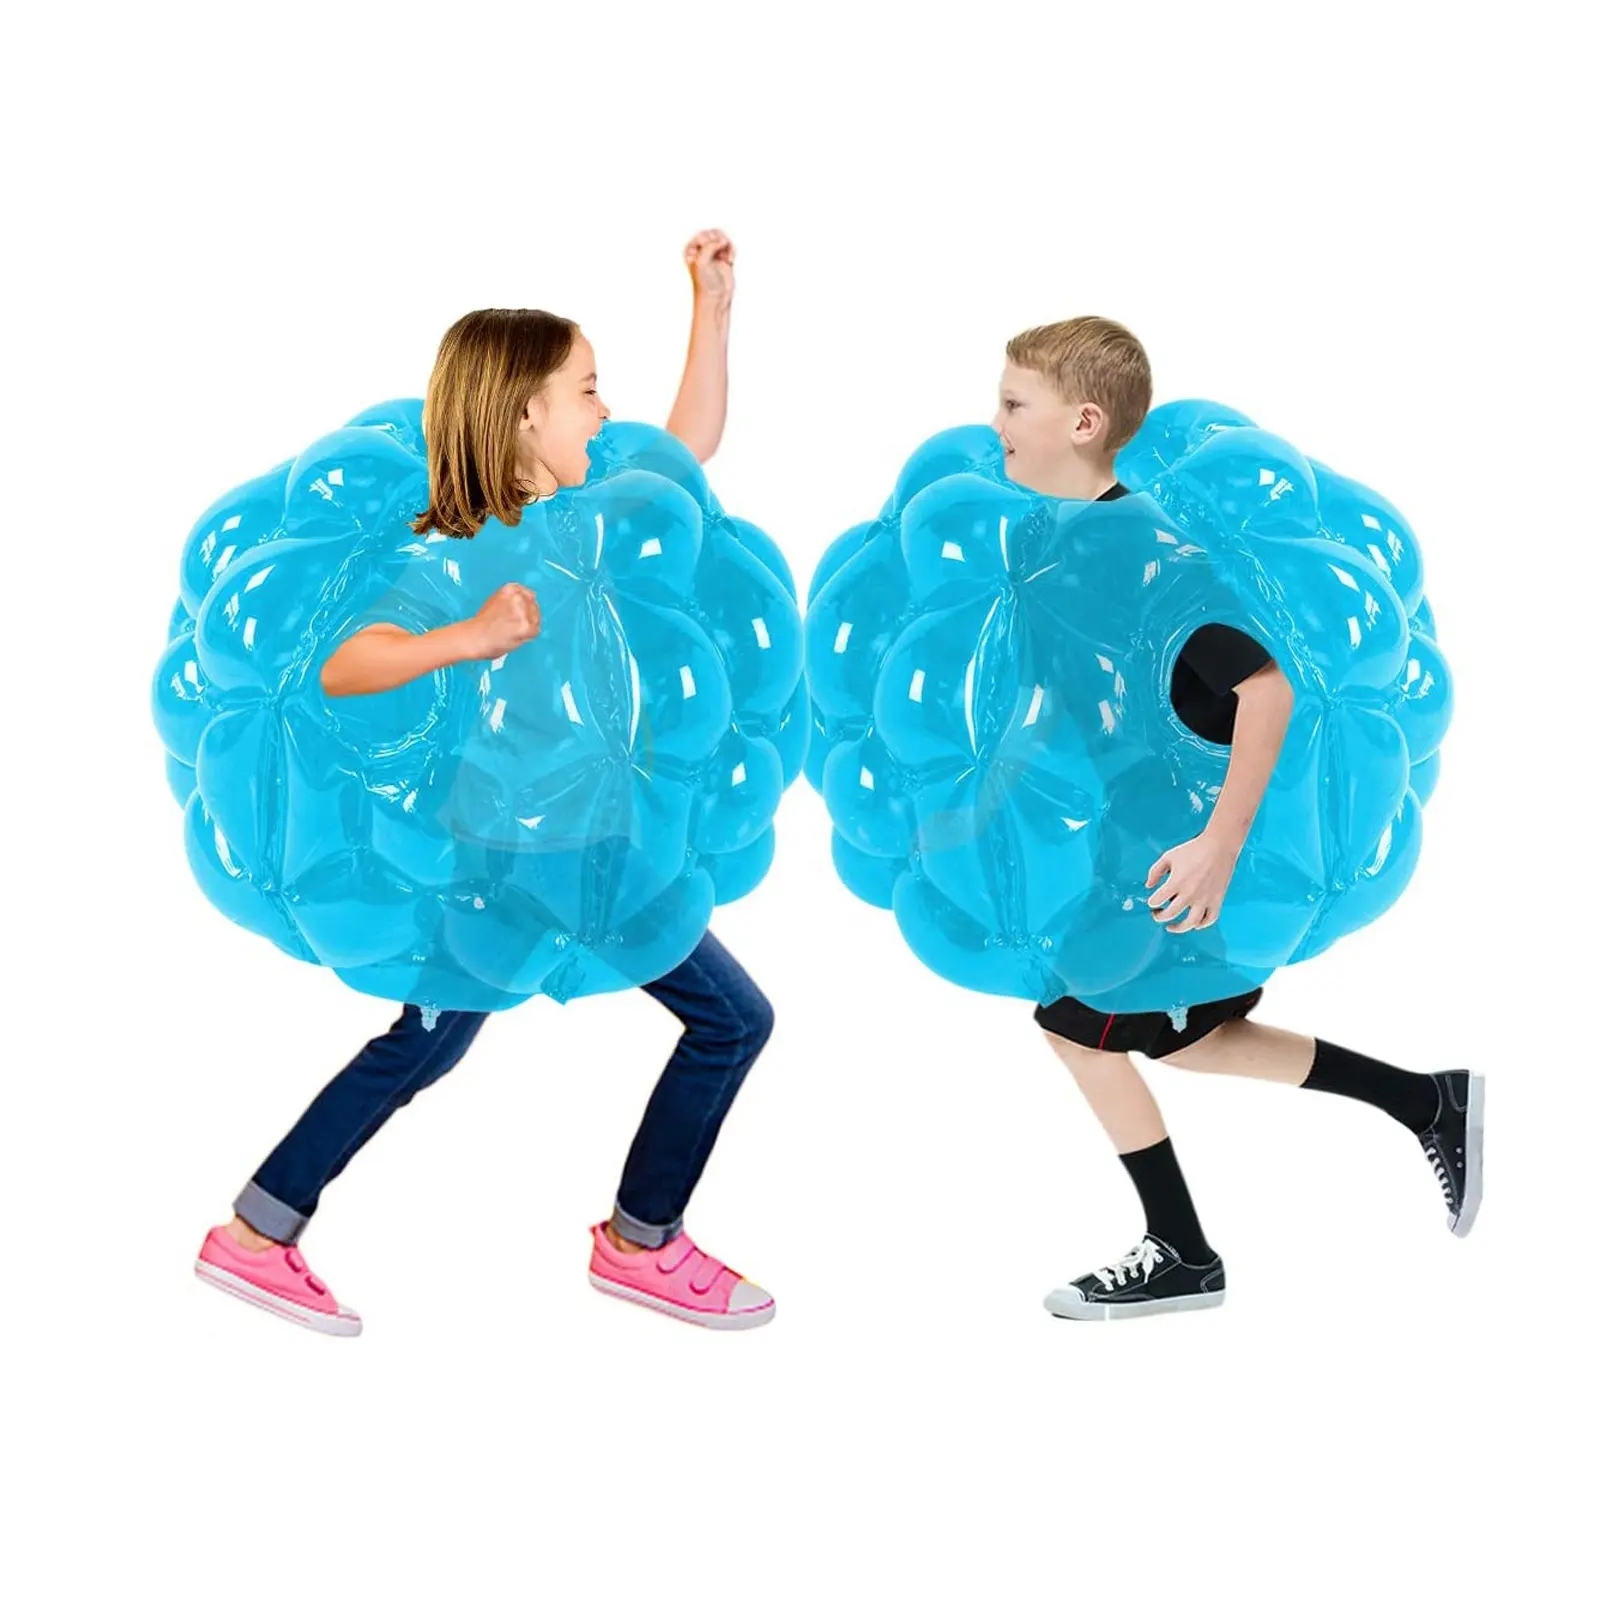 Inflatable Bumper Bubble Balls Human Hamster Knocker Ball Body Zorb Ball for Adults & Teens Outdoor Team Gaming Play